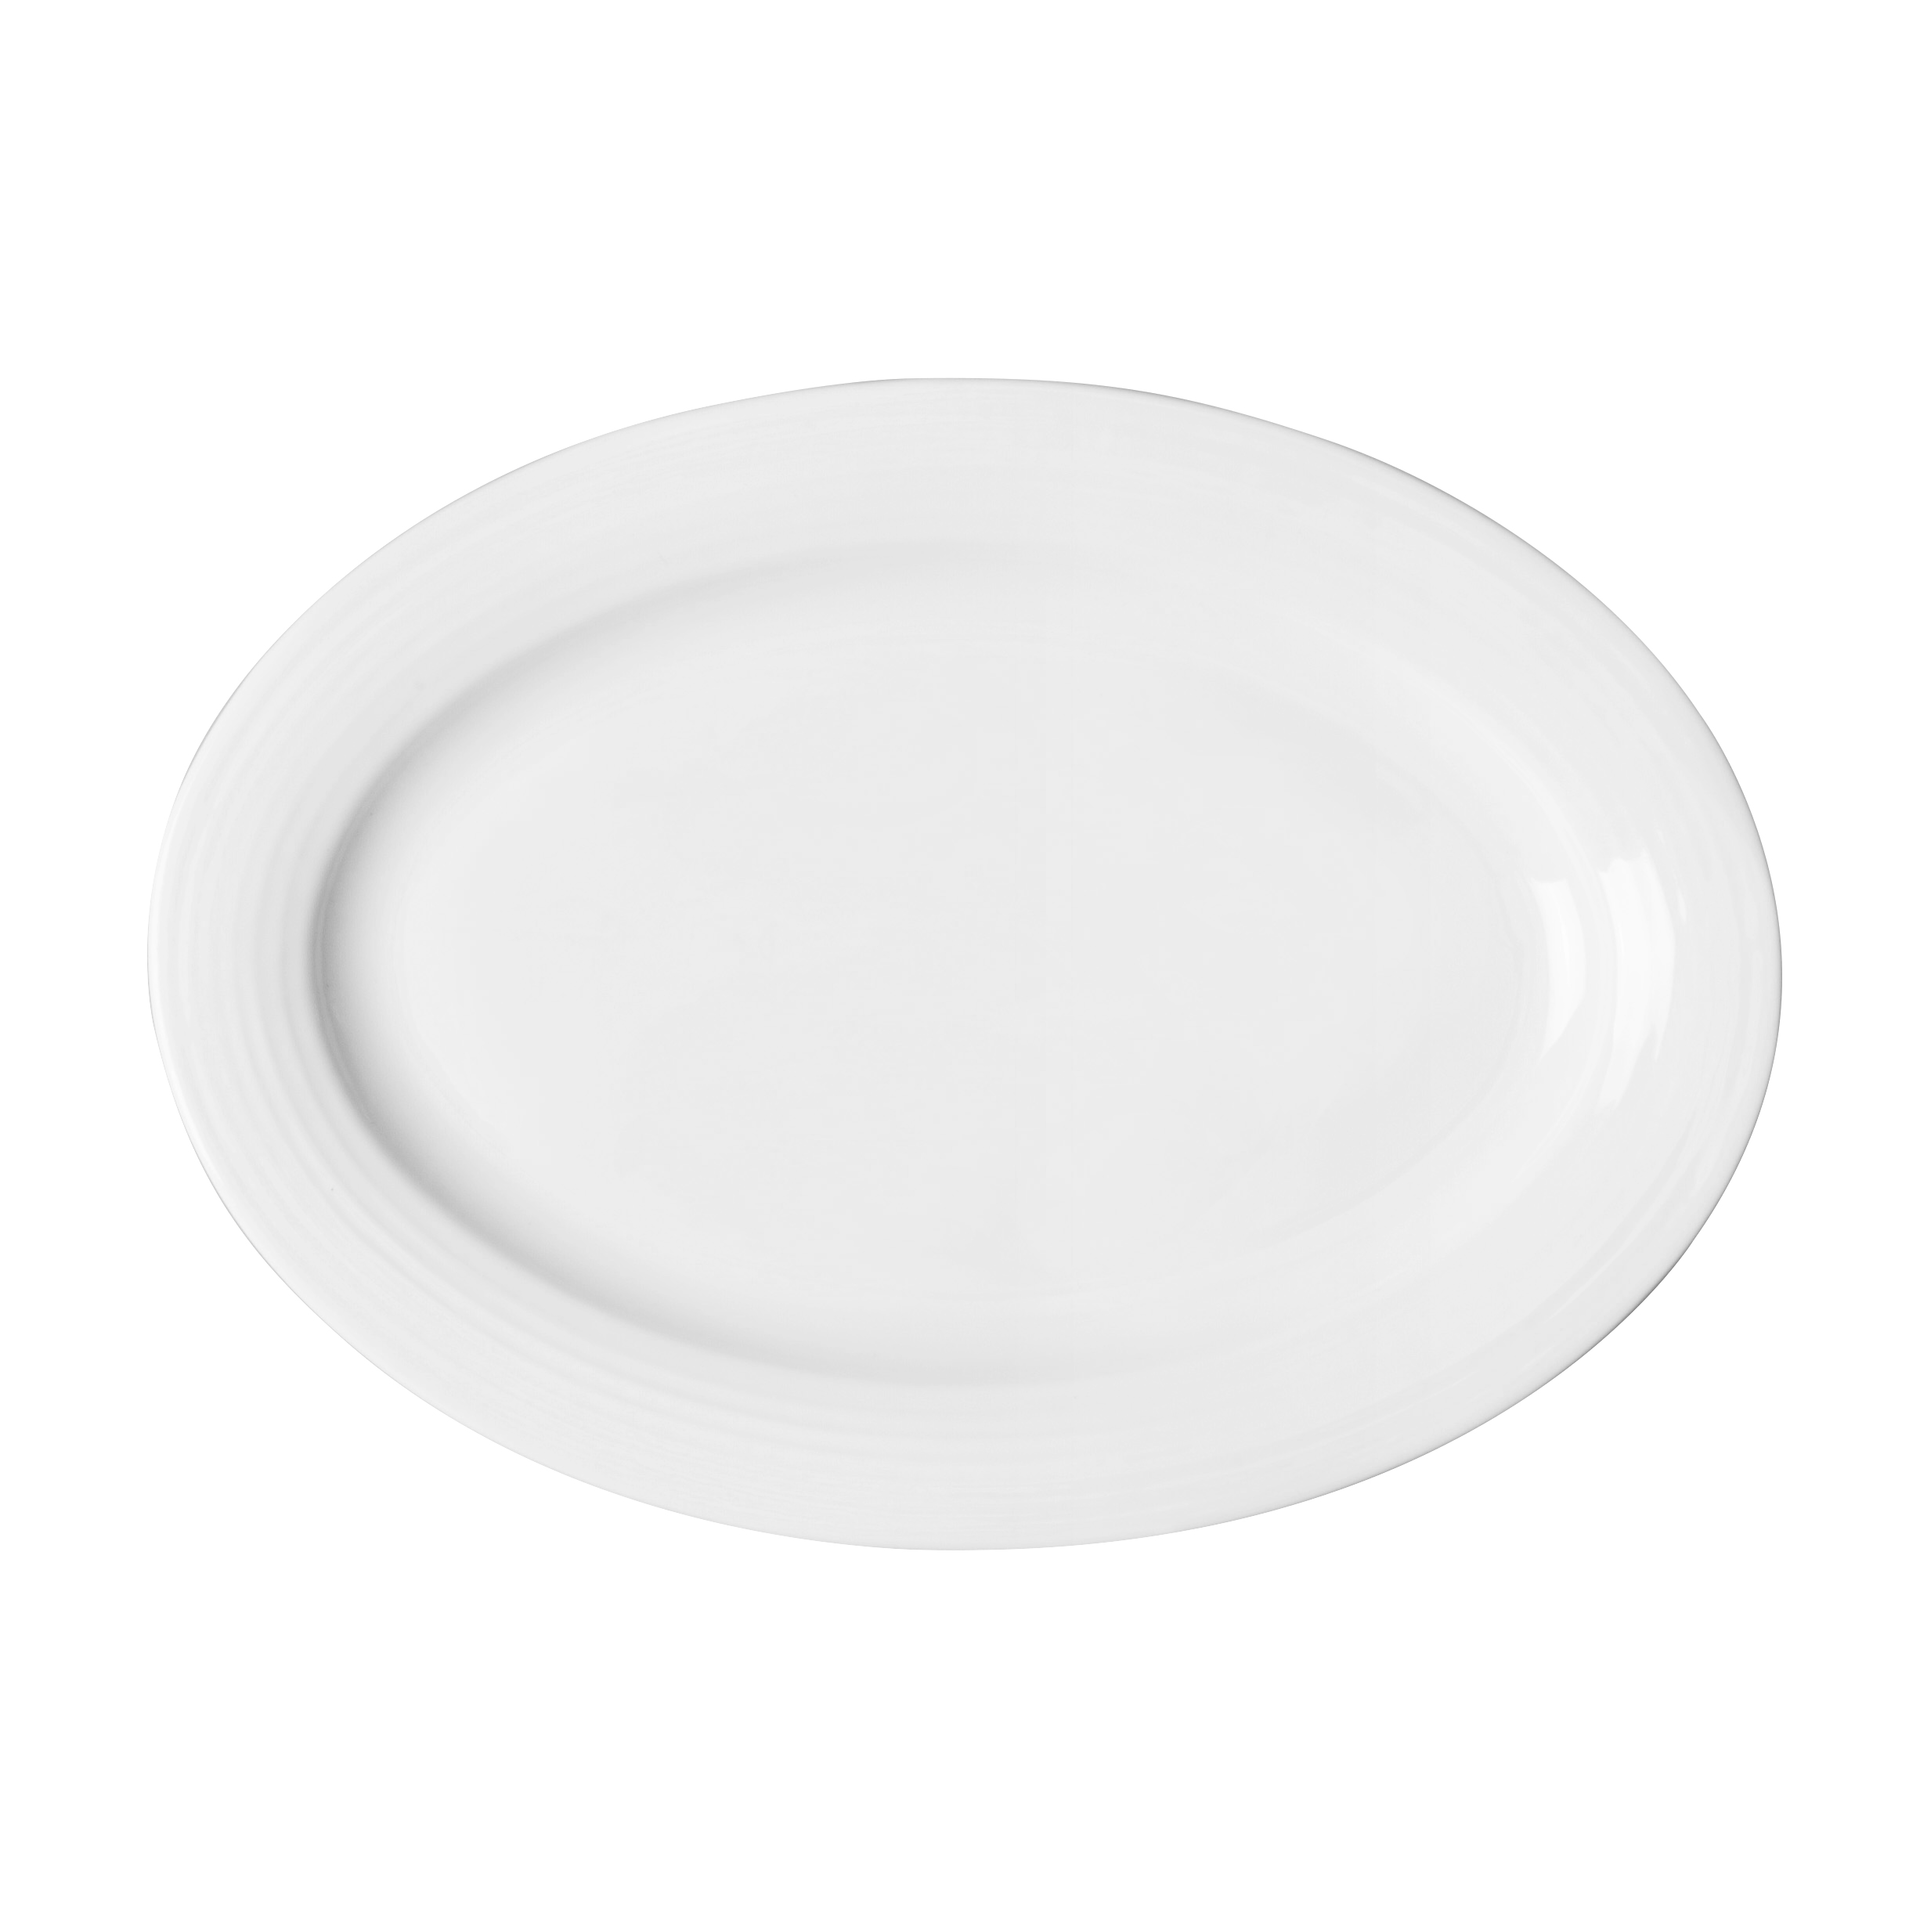 Best Selling Products Scratch Proof Plate for Wedding WhiteOblong Plates Ceramic, Oval Dinner Plates,Restaurant Oval Plate%